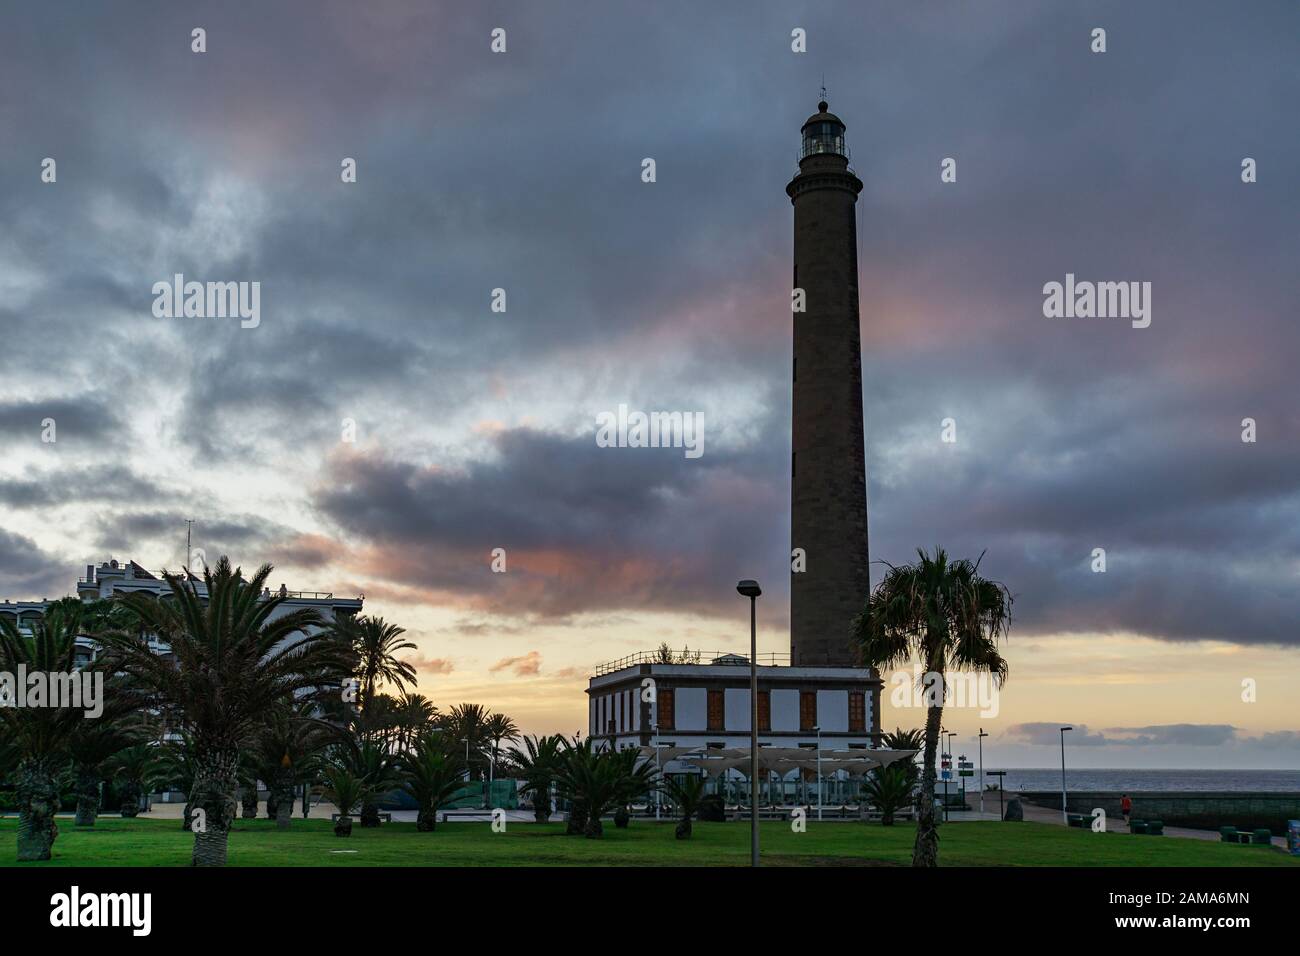 Grand Canary - View from the promnade towards Lighthouse at Maspalomas in the early morning at Sunrise, Spain, 11.06.2016 Stock Photo